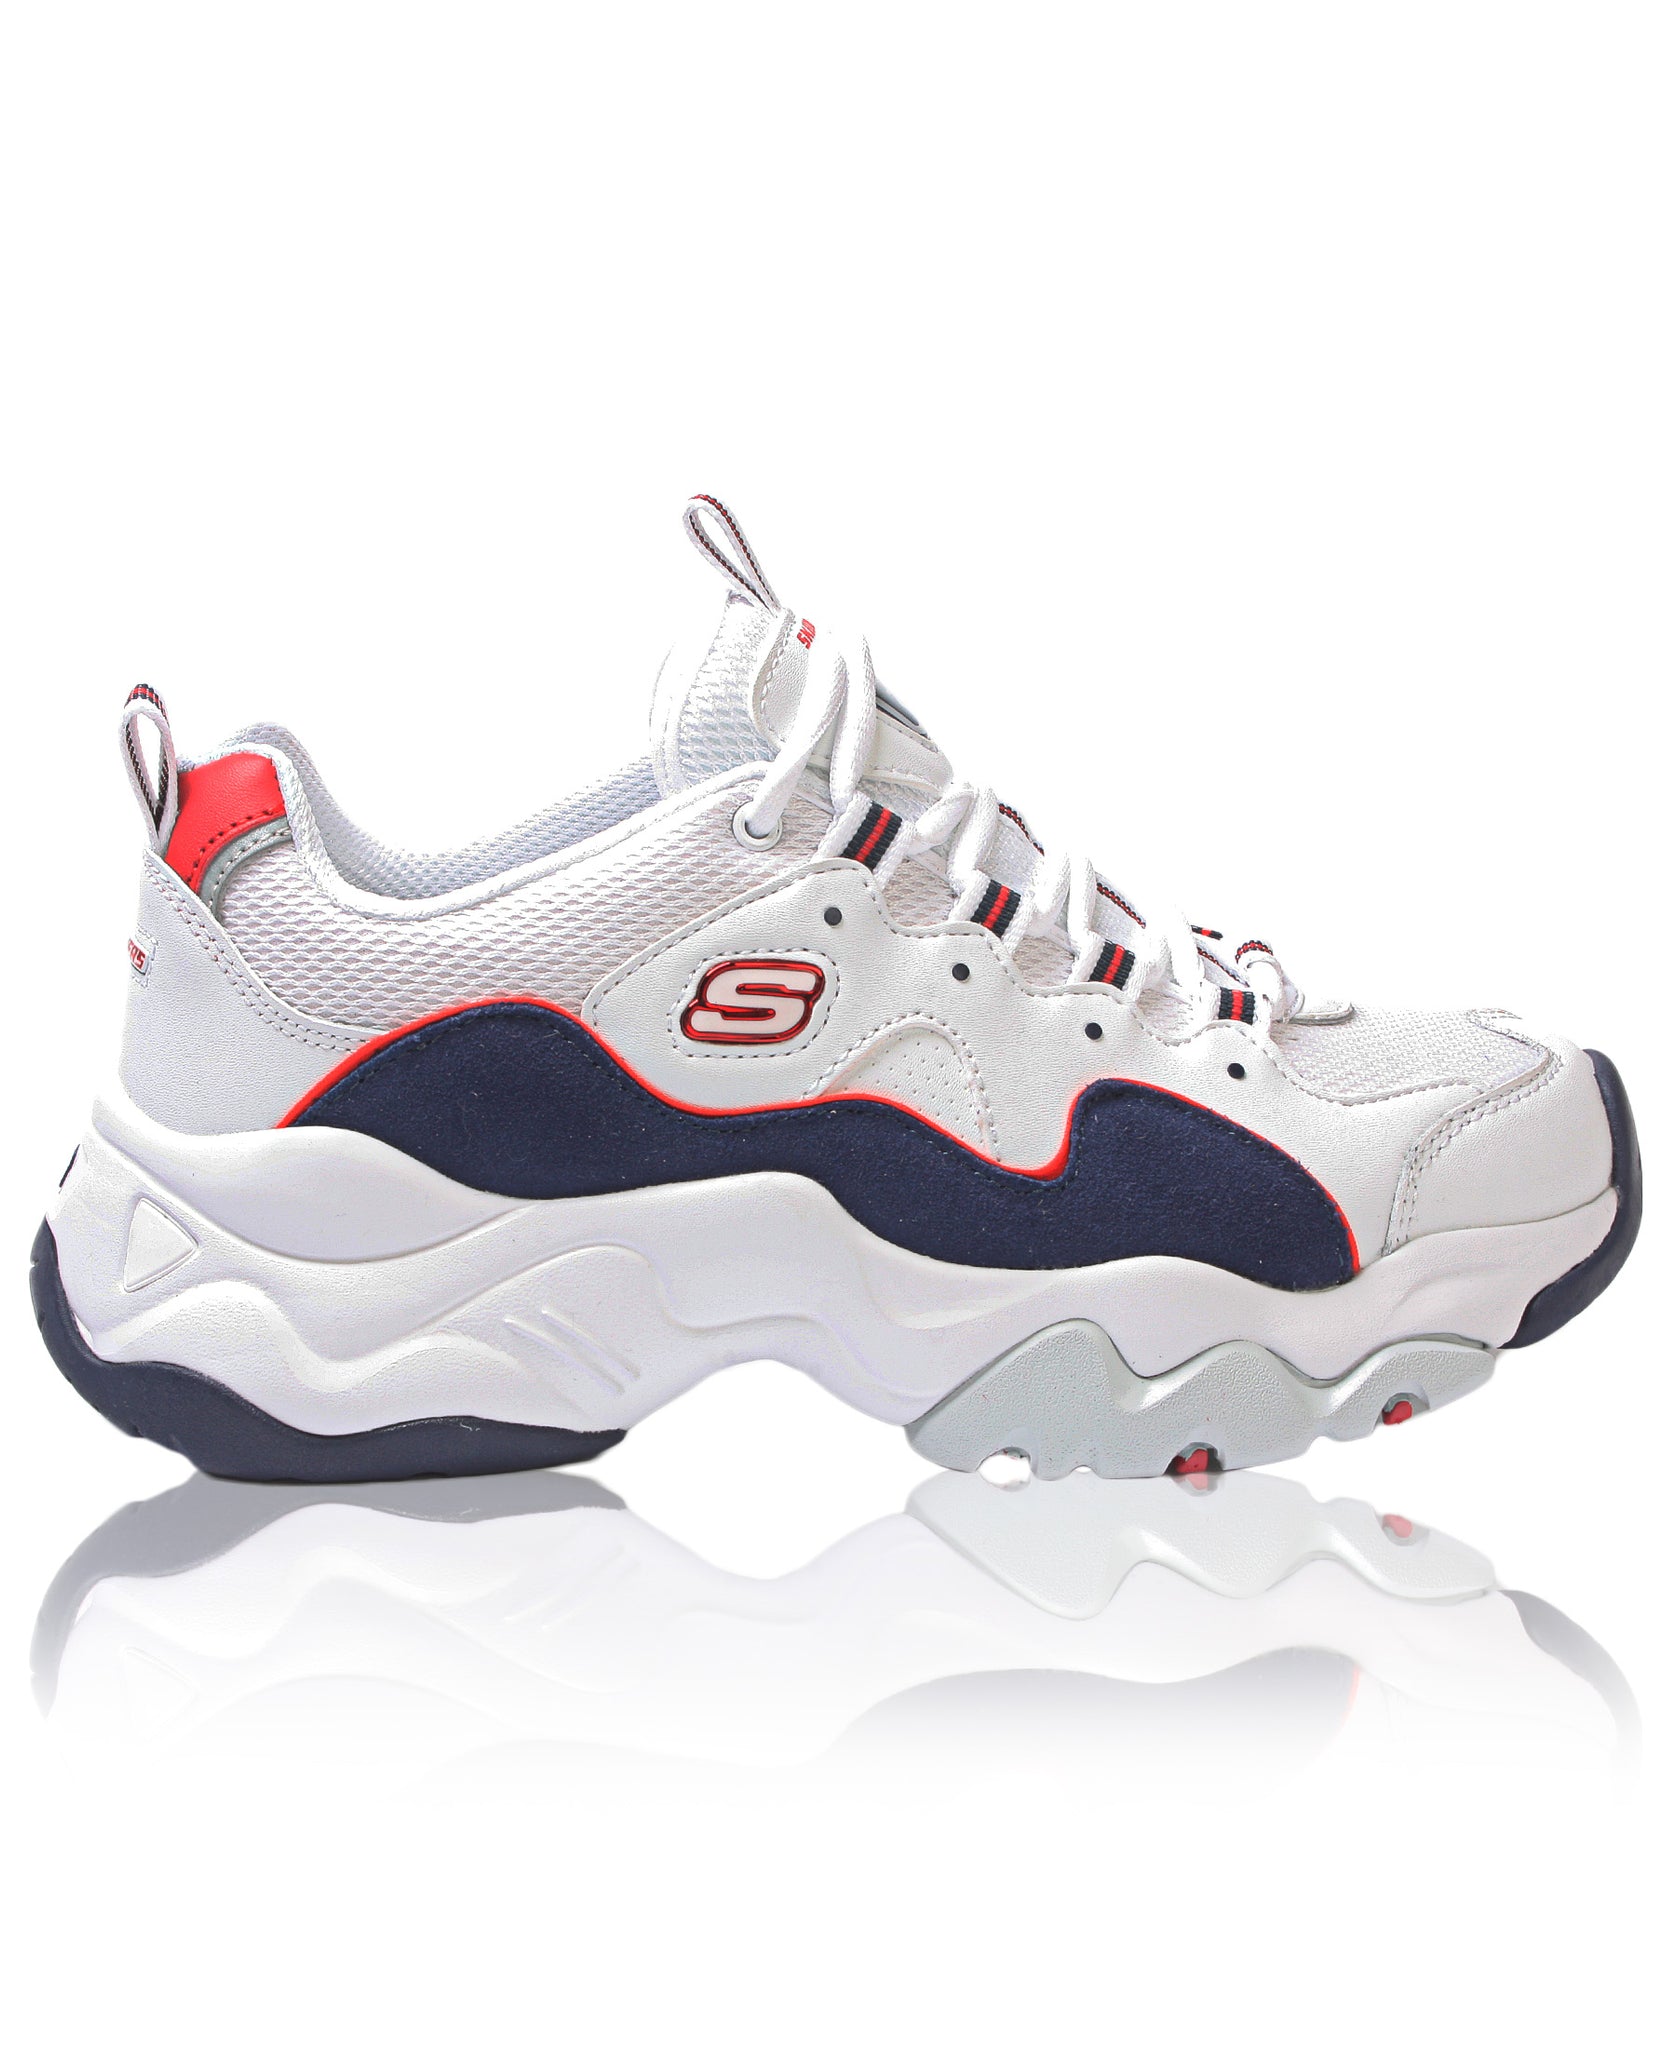 skechers online store south africa